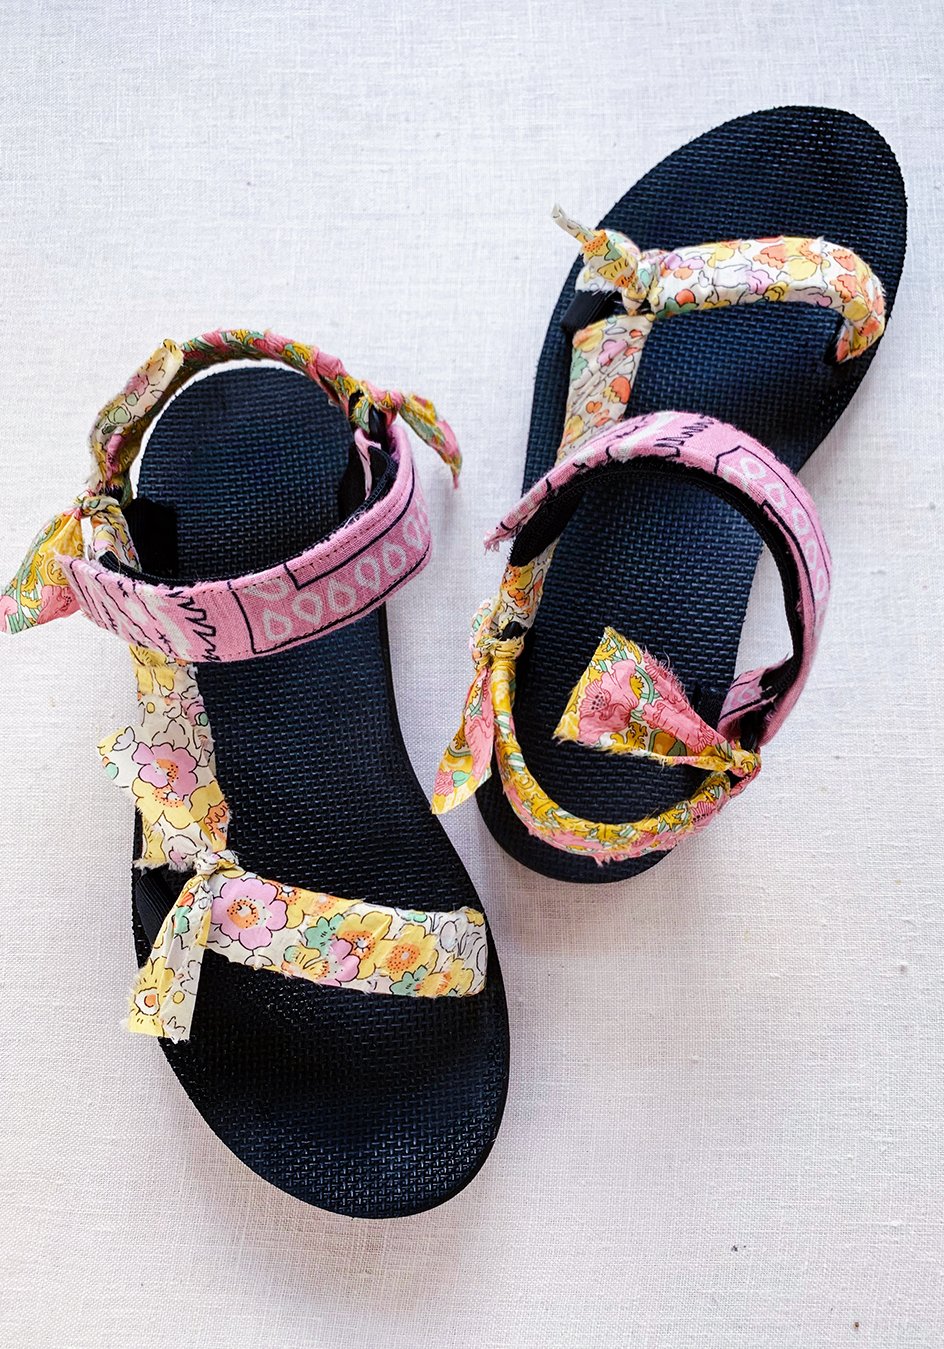 DIY Fabric Wrapped Teva Sandals - Honestly WTF